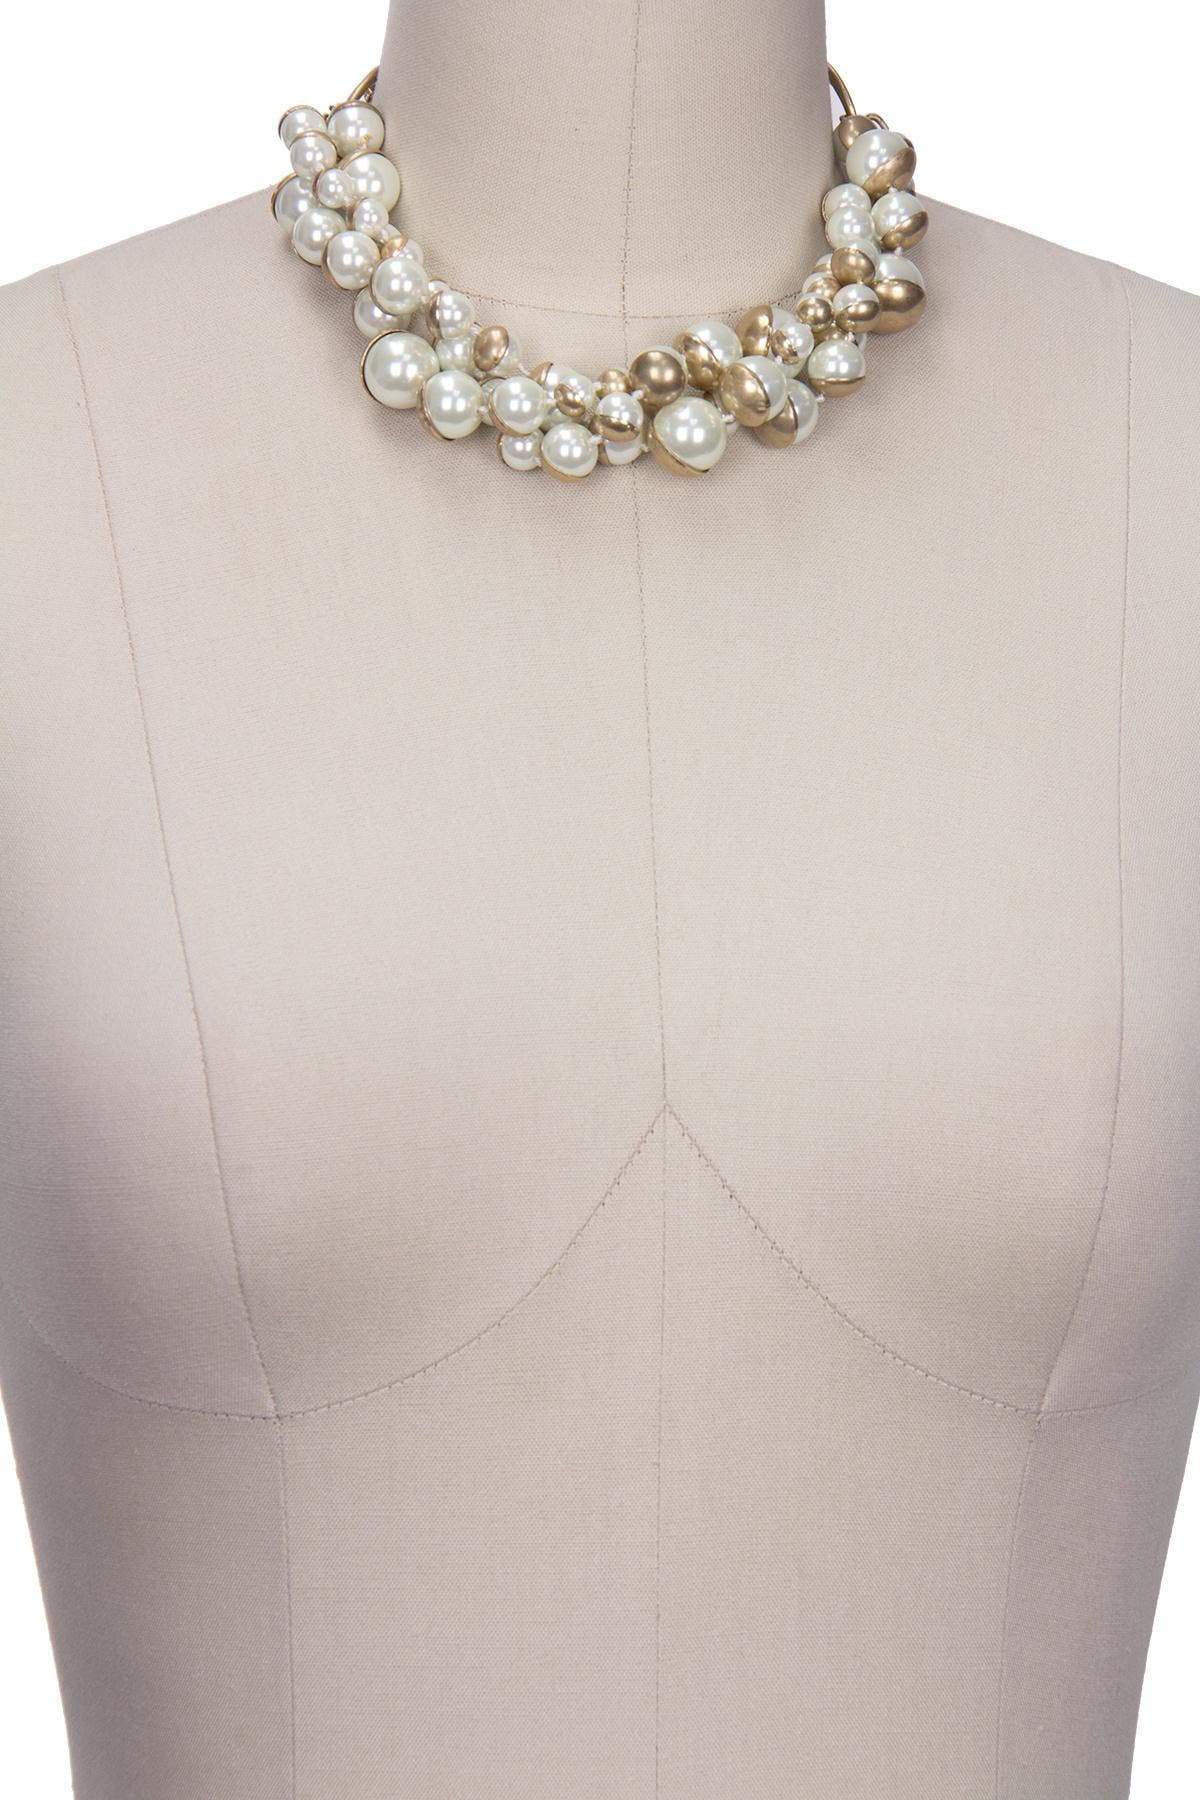 Saachi Half Moon Imitation Pearl Cluster Statement Necklace In White